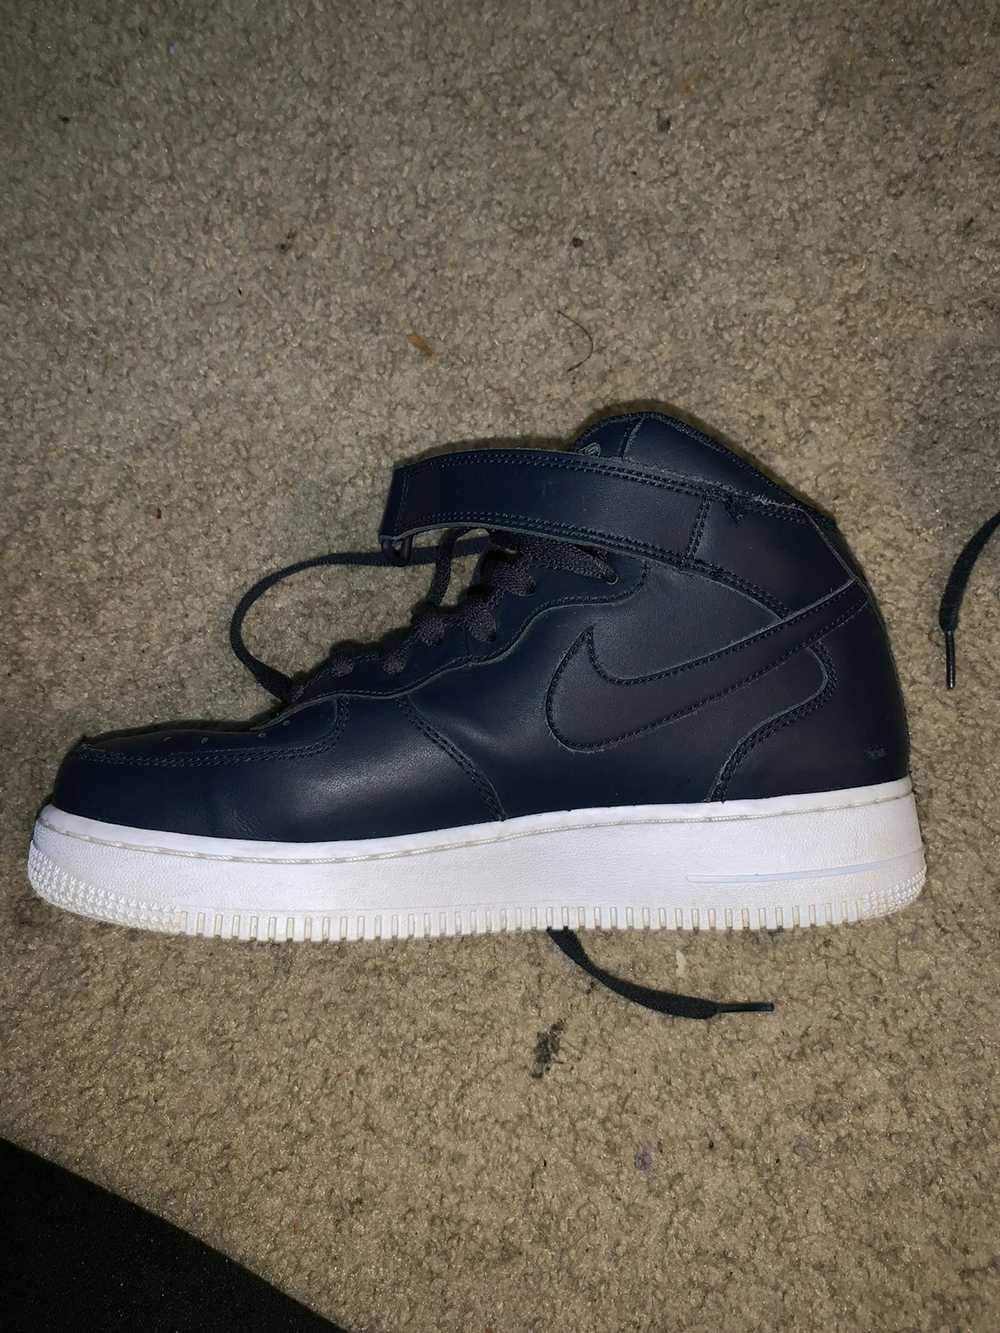 Nike Air Force 1 Mid - image 2